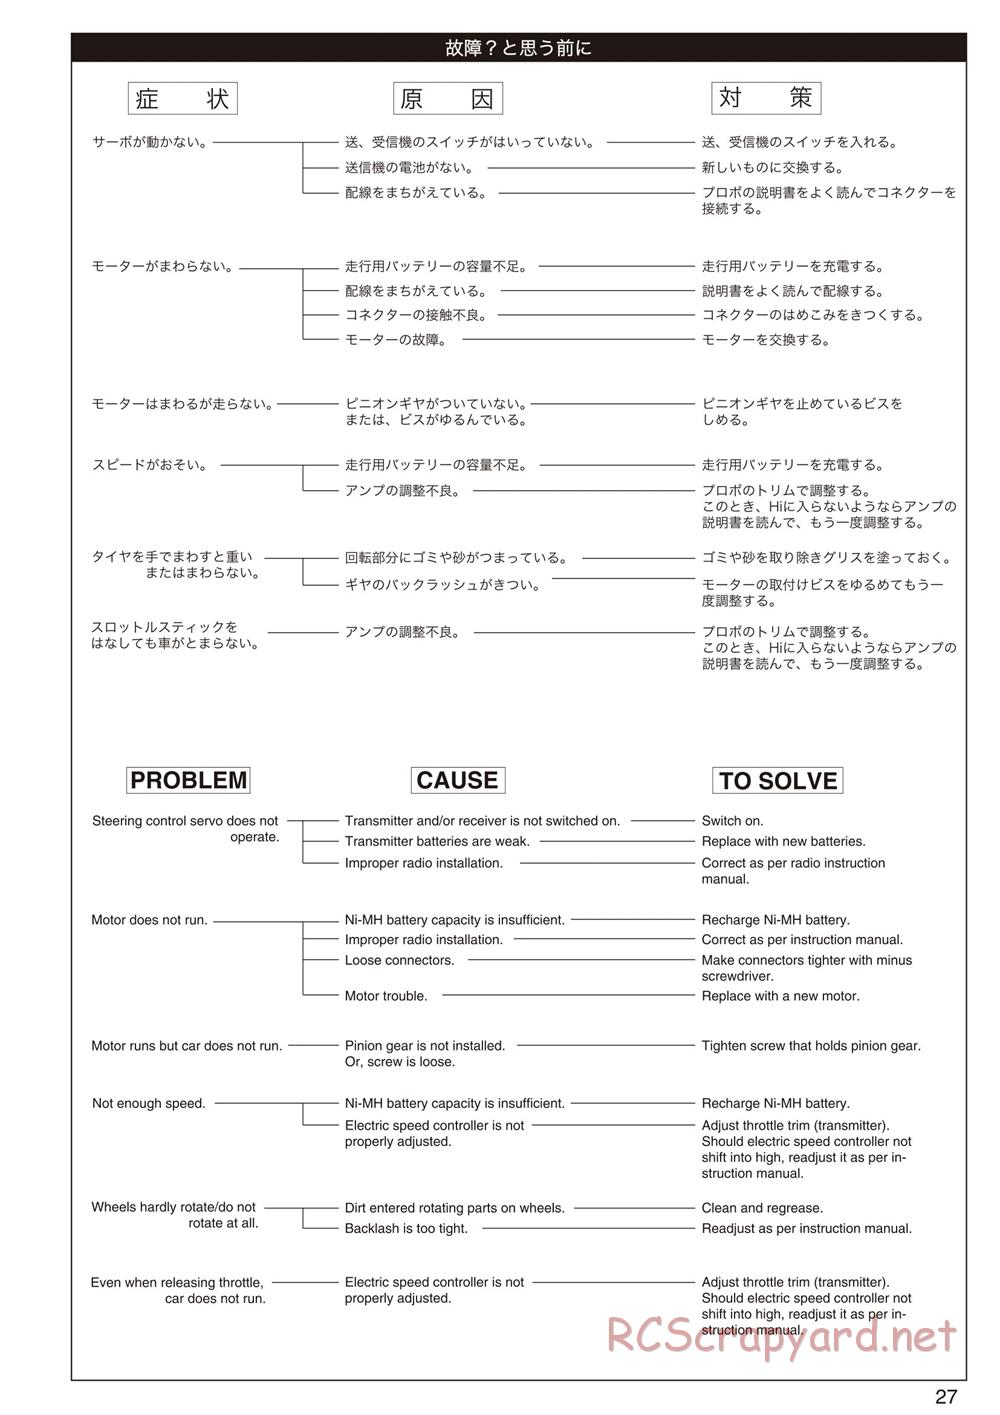 Kyosho - Ultima RB5 SP - Manual - Page 27